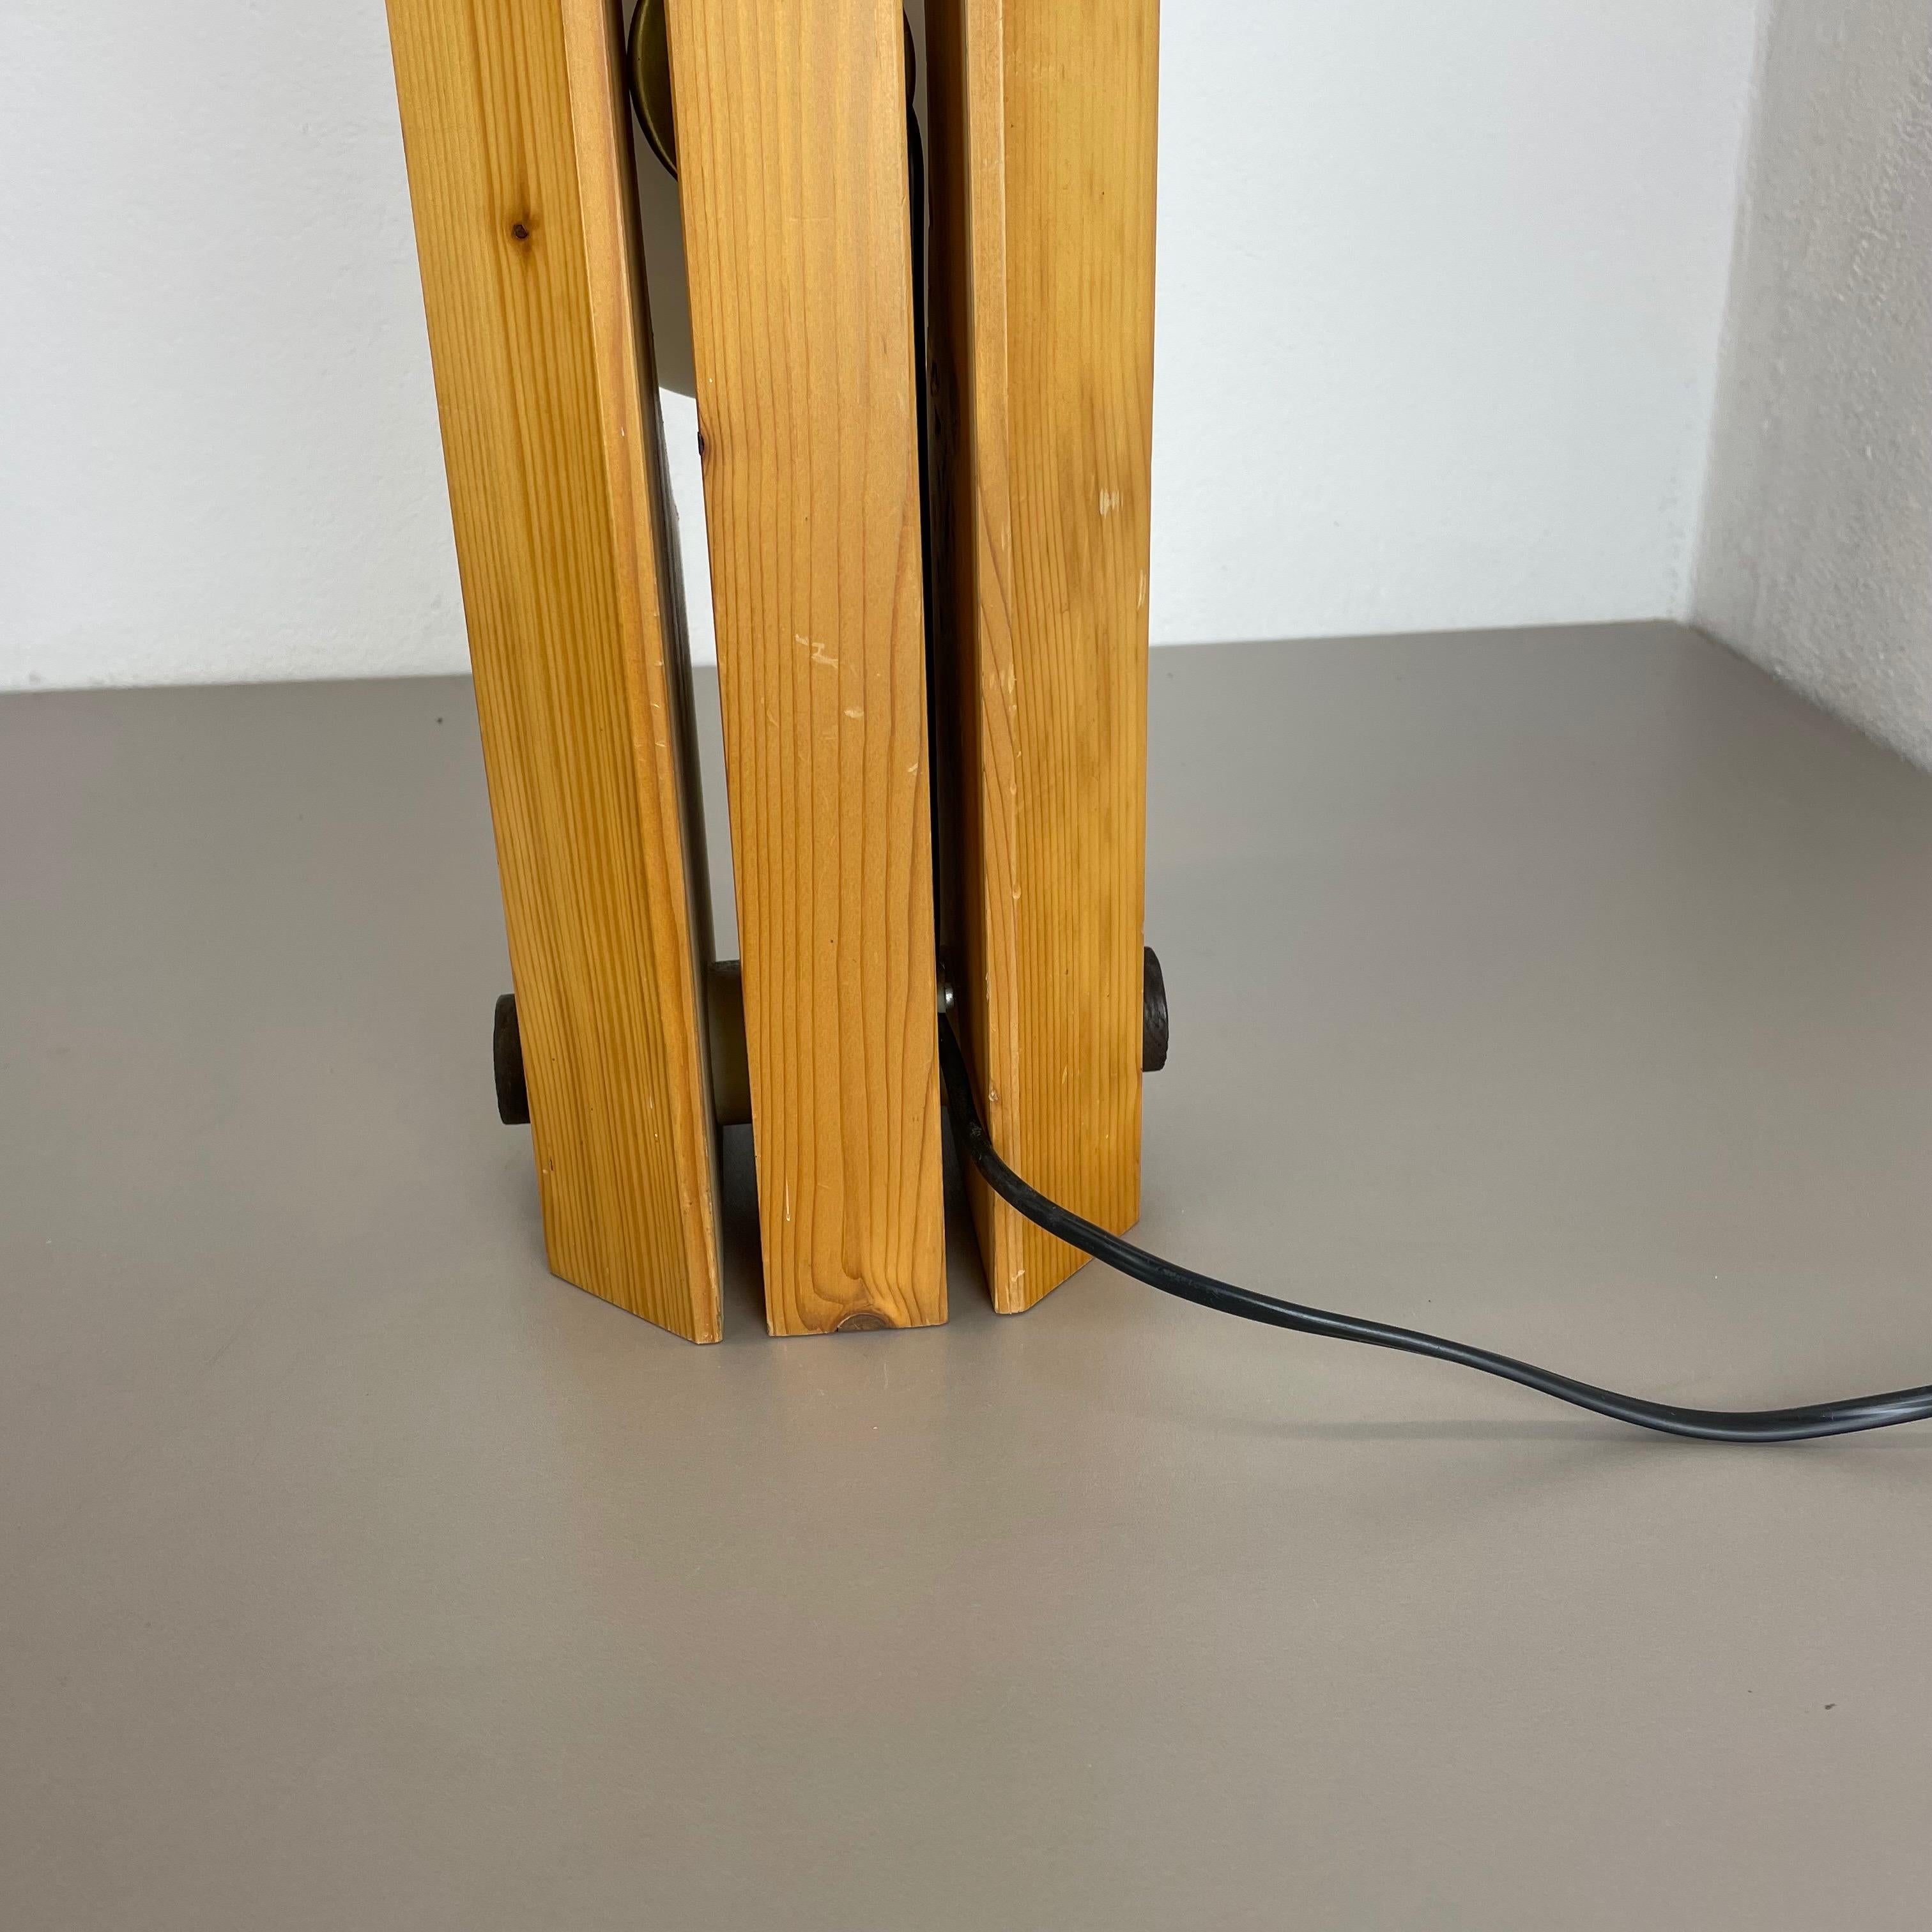 Large Organic Sculptural PINE Wooden Table Light by Temde Lights, Germany 1970s For Sale 9